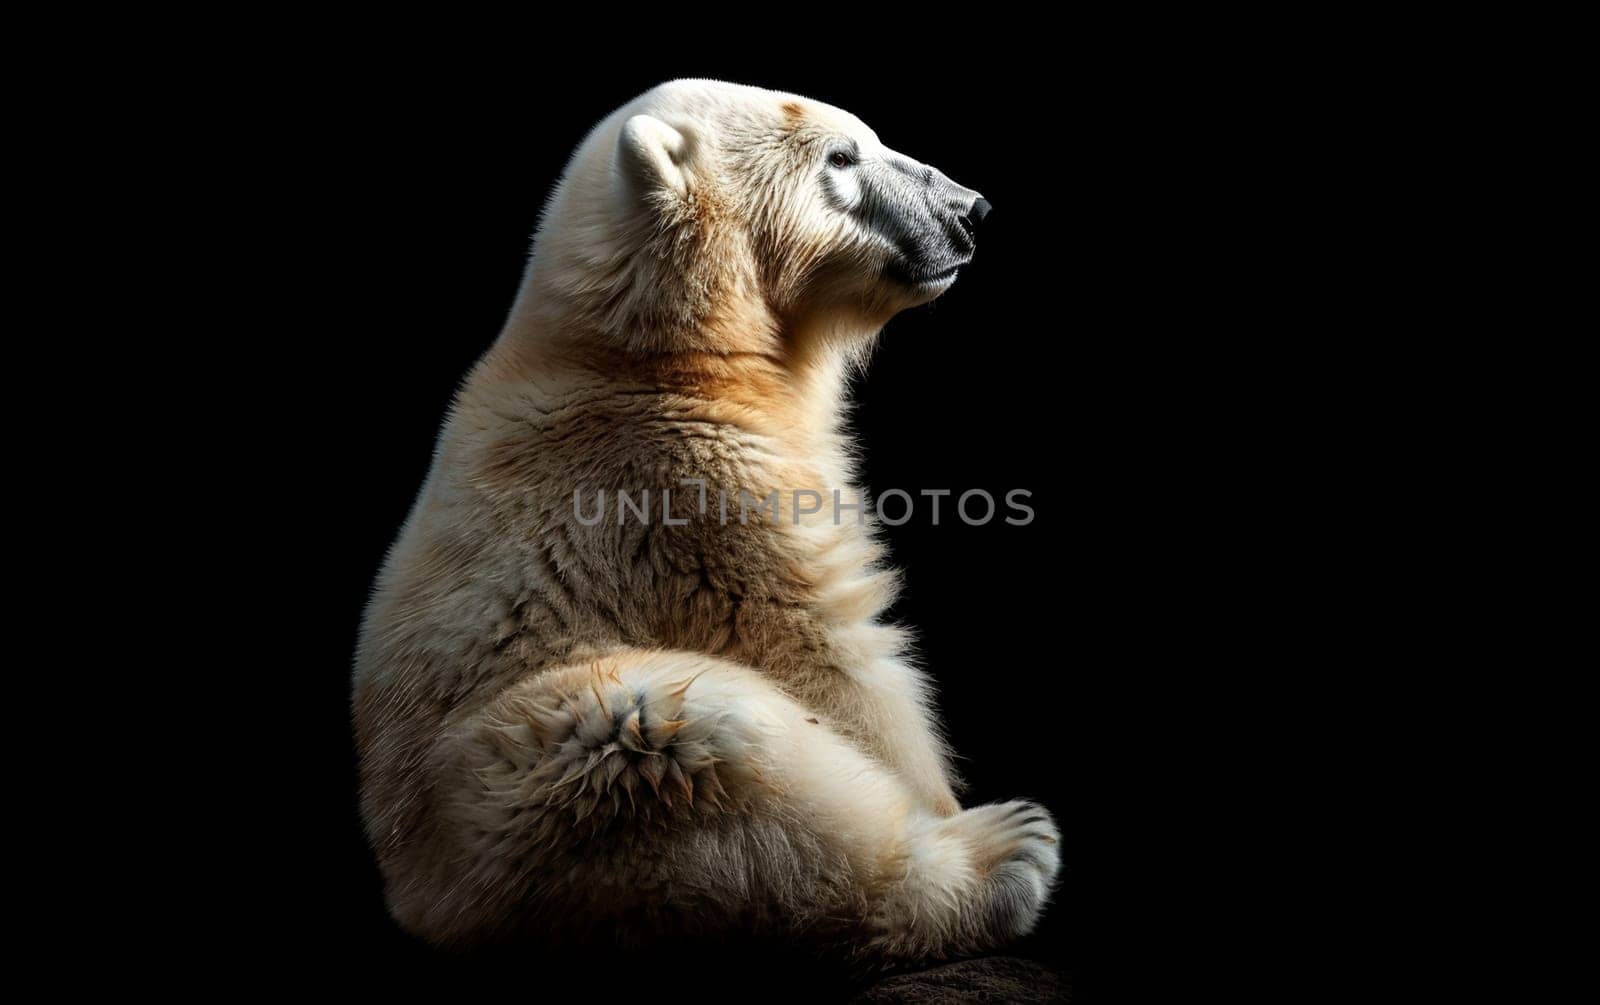 A polar bear cub stands in profile against a stark black background, its posture reflecting solitude and a silent plea for the protection of its kind.